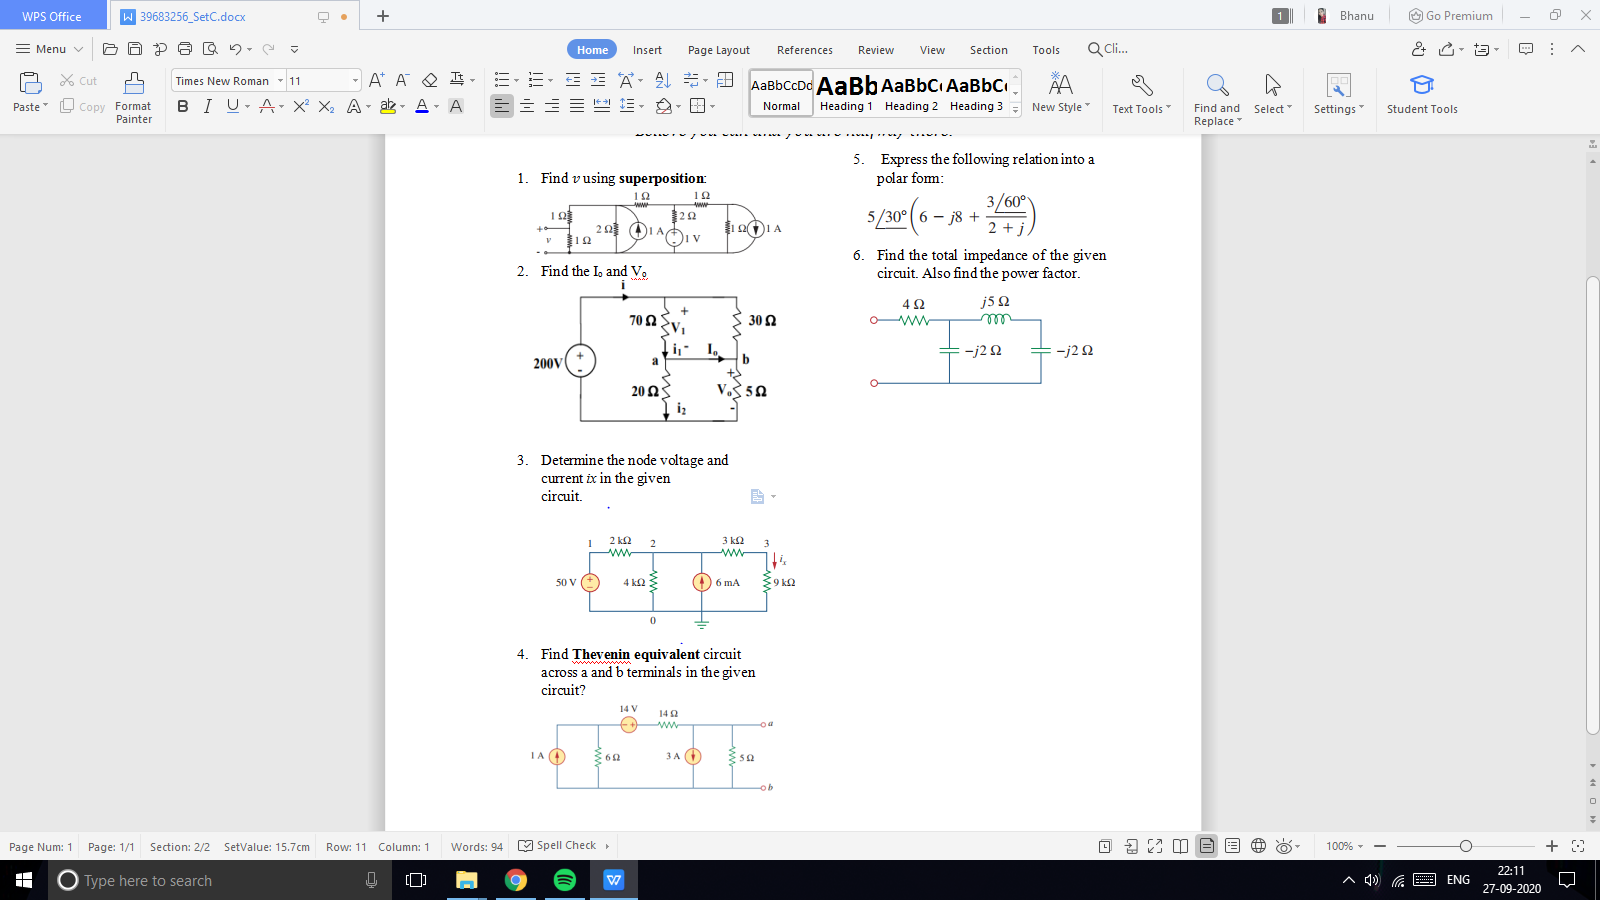 3. Determine the node voltage and
current ix in the given
circuit.
2 ka
2
3 ka
3
ww
50 V
4 kQ
6 mA
9 kQ
